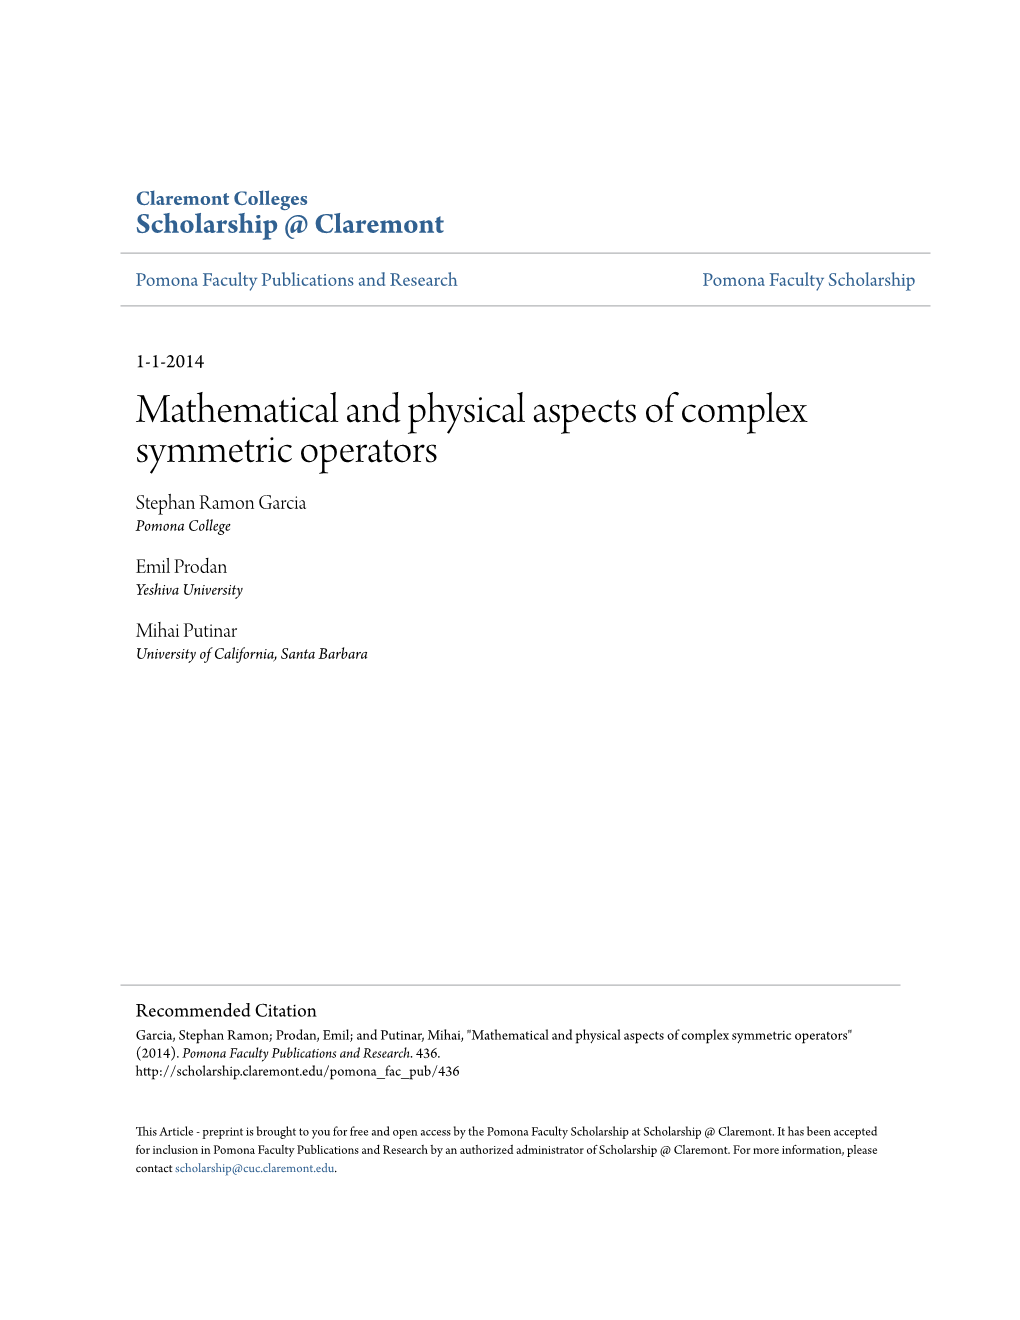 Mathematical and Physical Aspects of Complex Symmetric Operators Stephan Ramon Garcia Pomona College